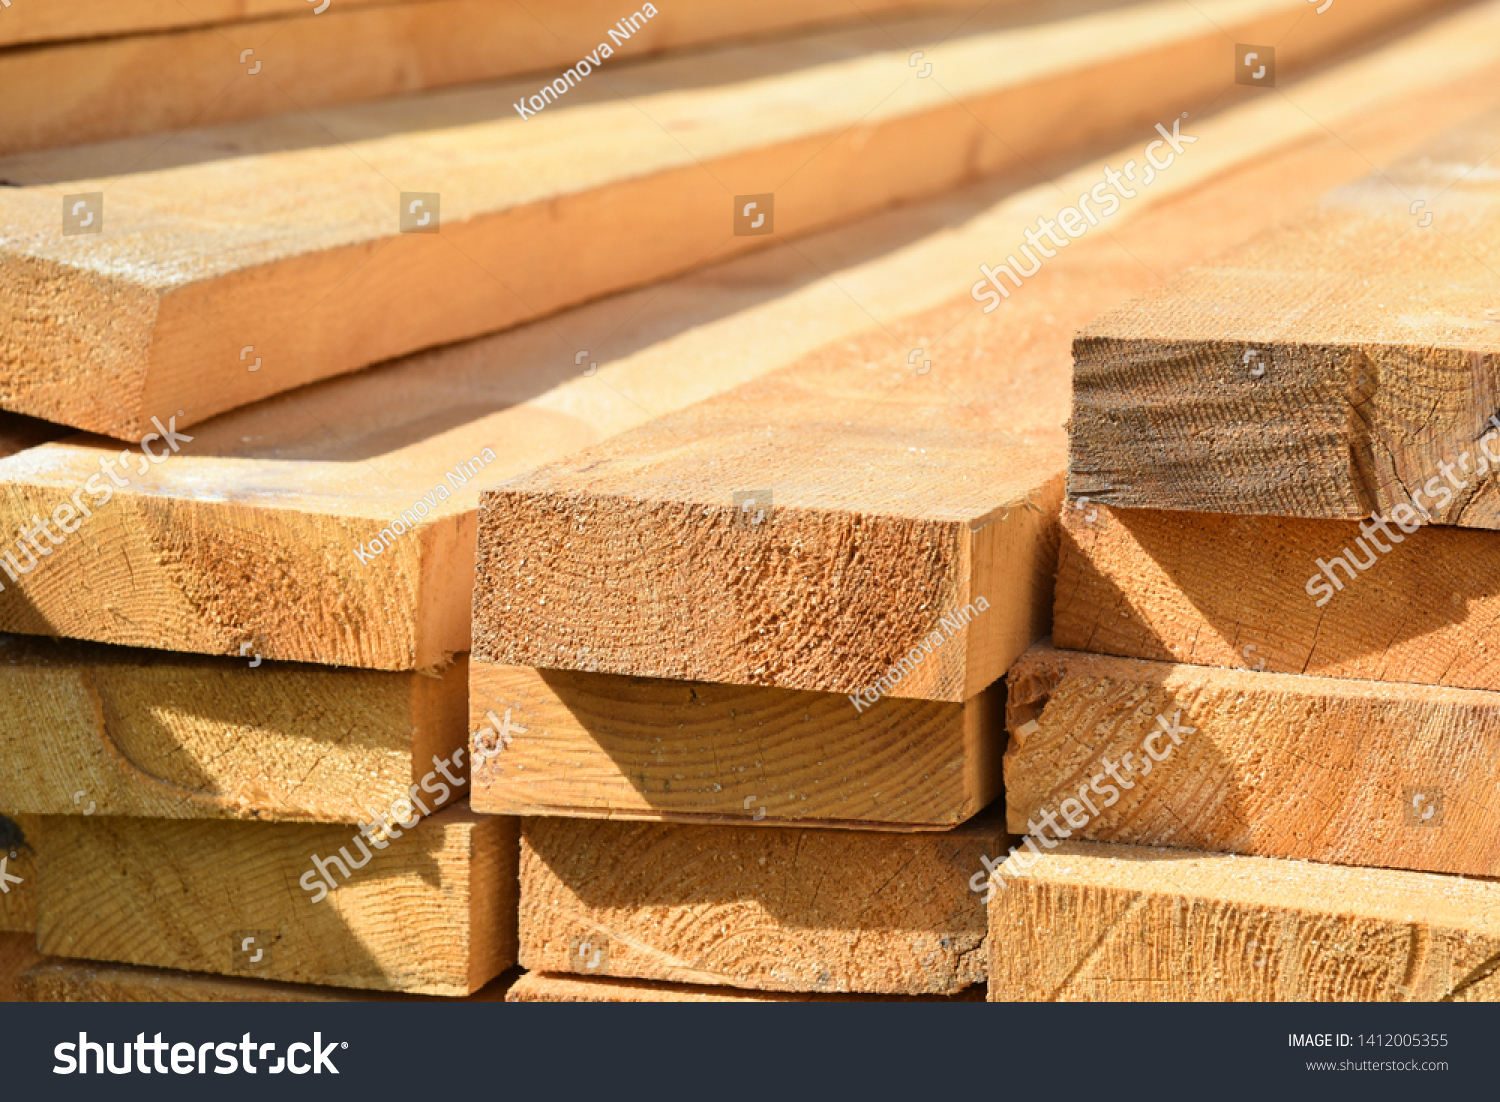 Stacked lumber. Folded wood.Closeup wooden boards.The surface of the end of the board.Lots of planks stacked on top of each other in the warehouse.Lumber for use in construction. #1412005355